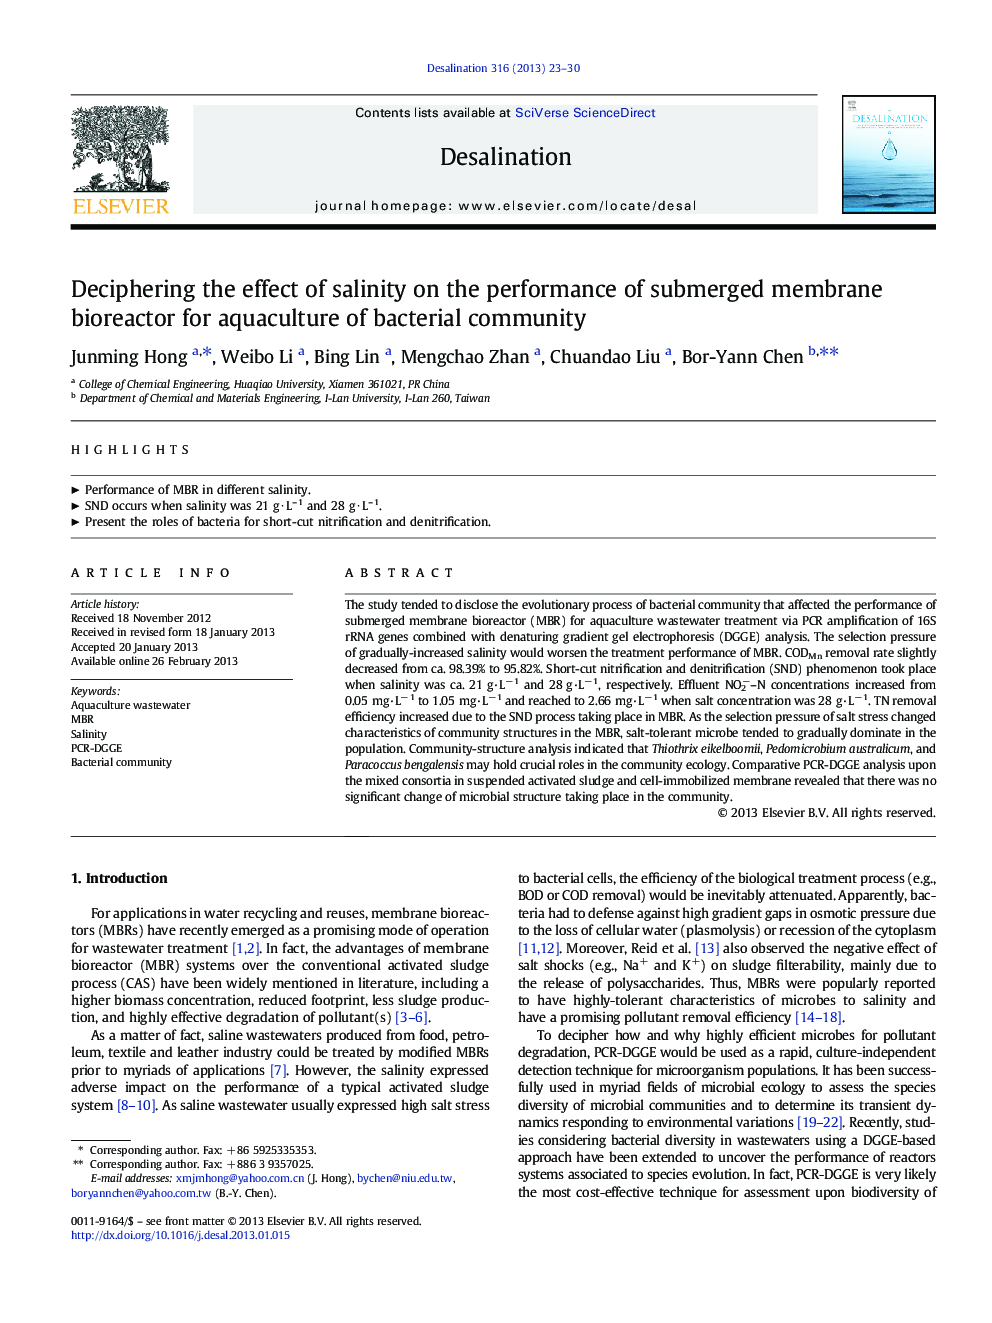 Deciphering the effect of salinity on the performance of submerged membrane bioreactor for aquaculture of bacterial community